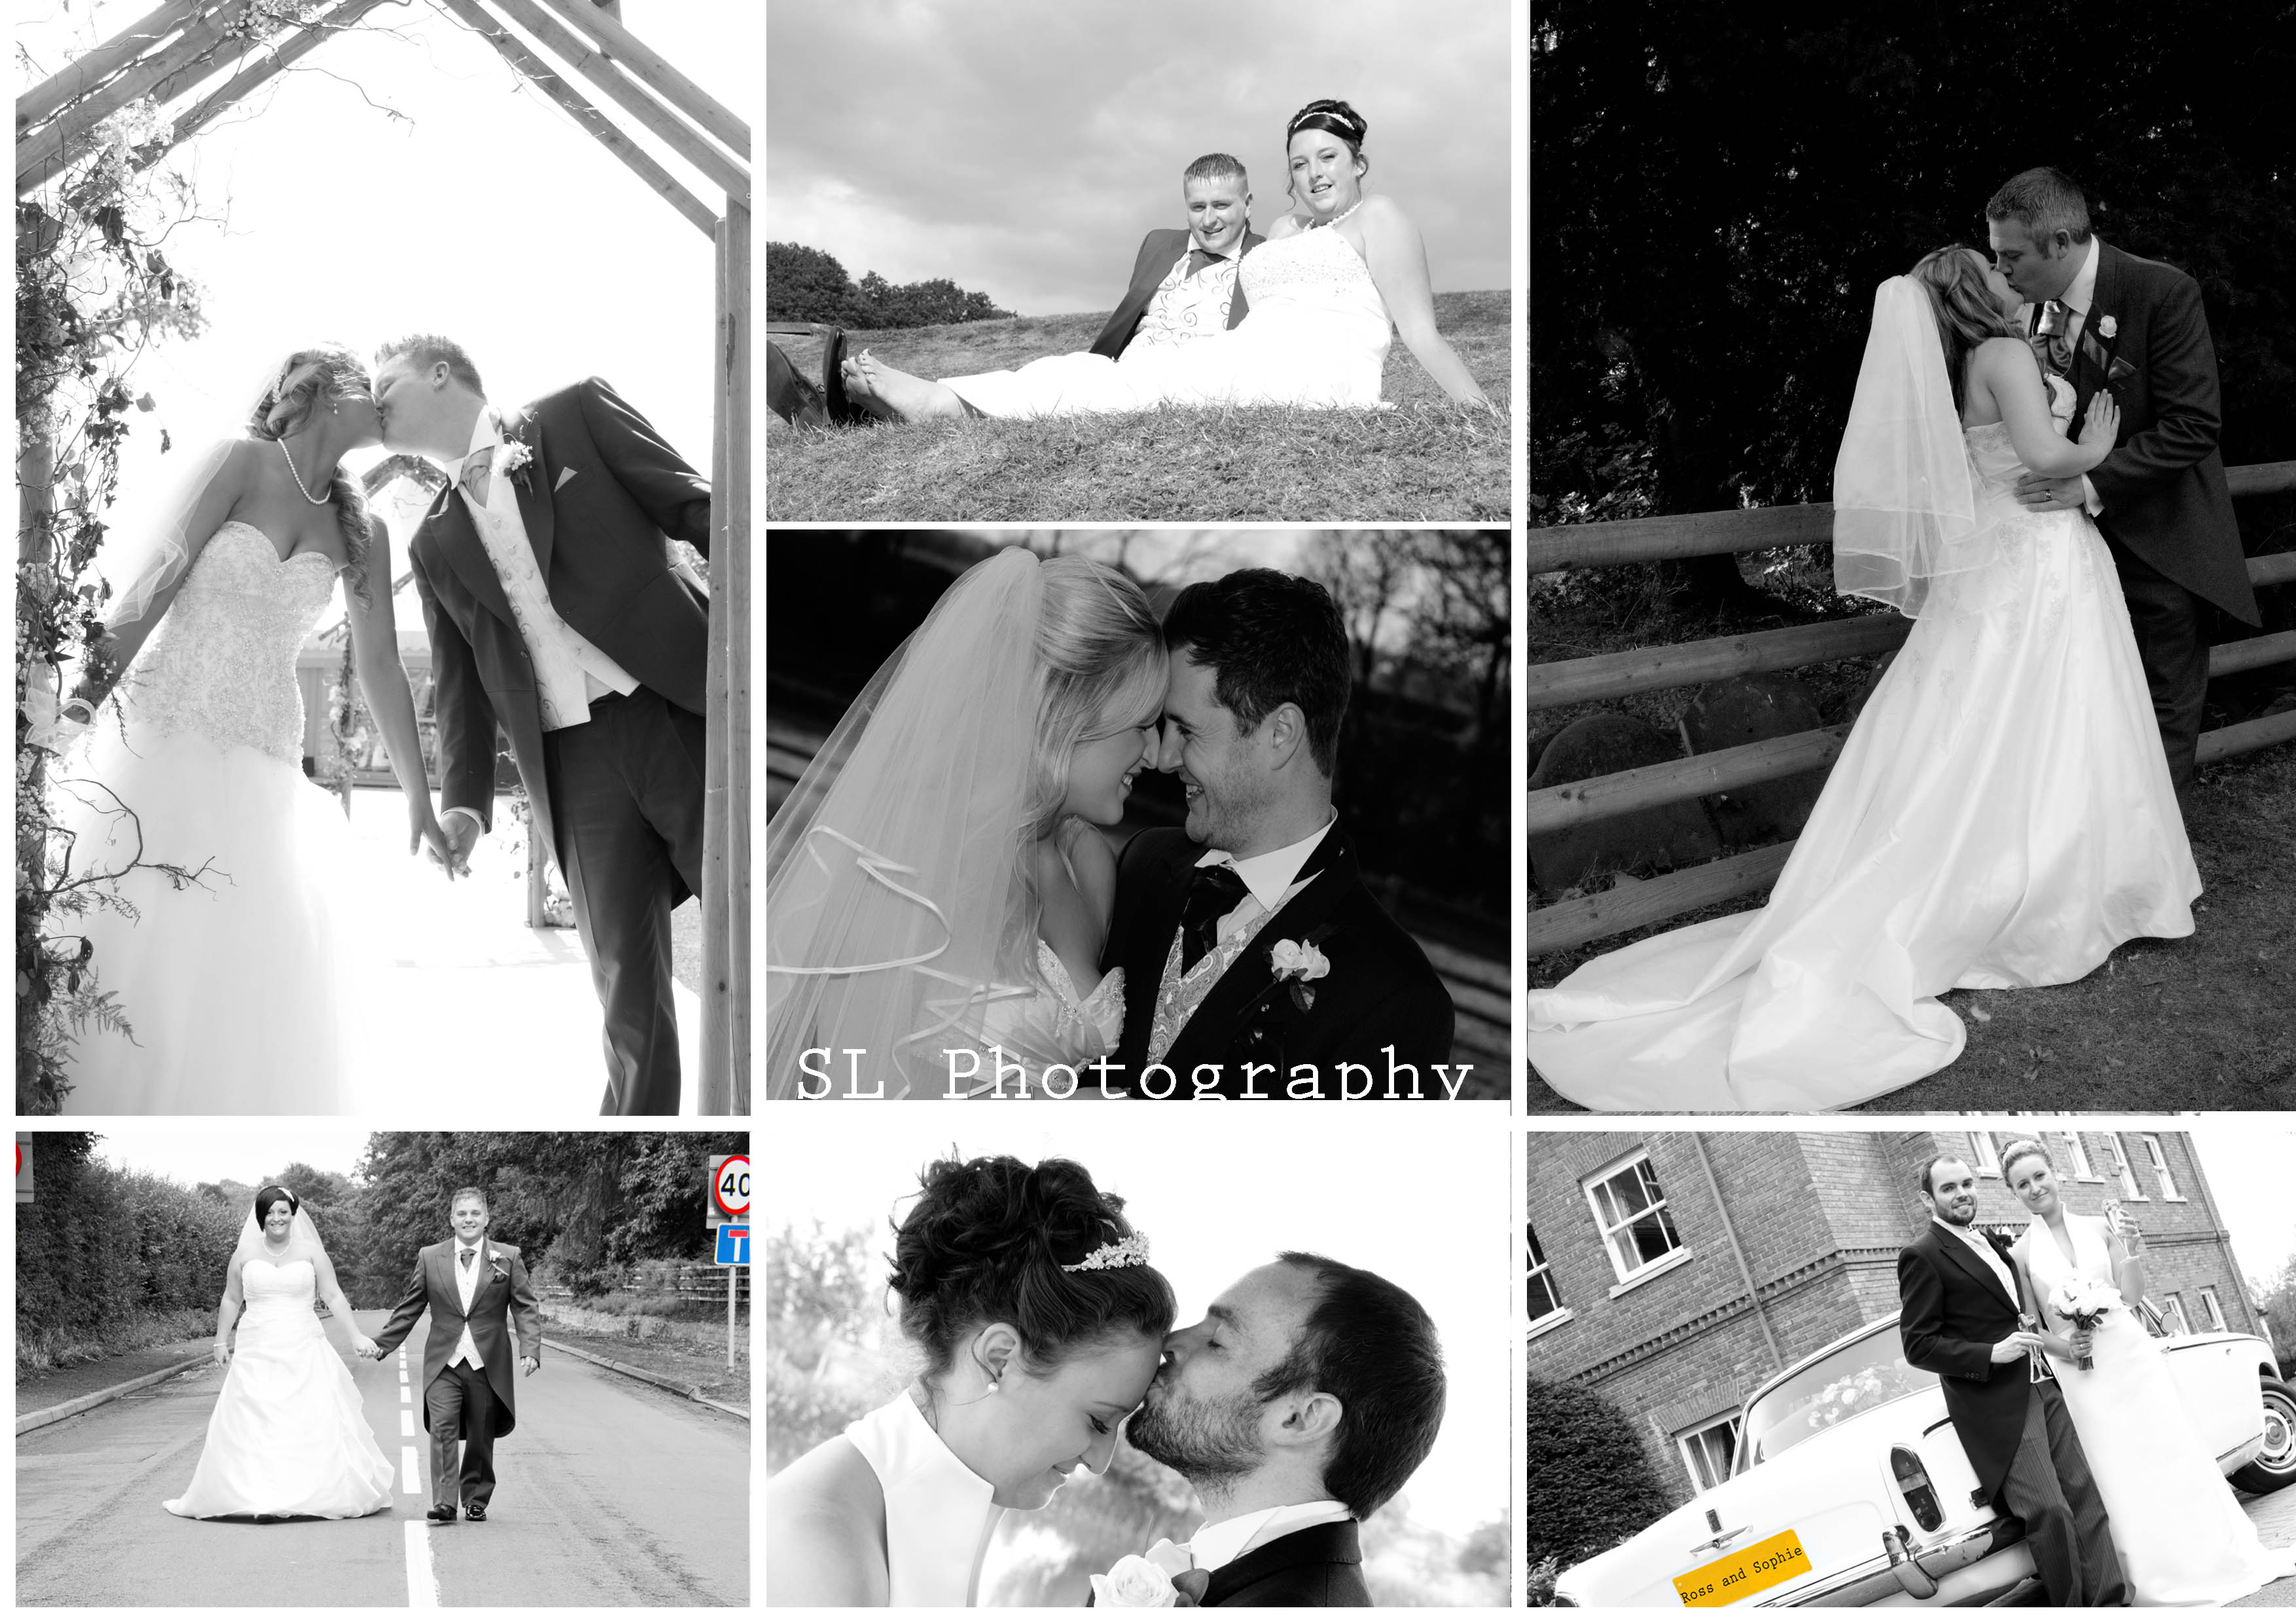 a few of my black and white wedding shots